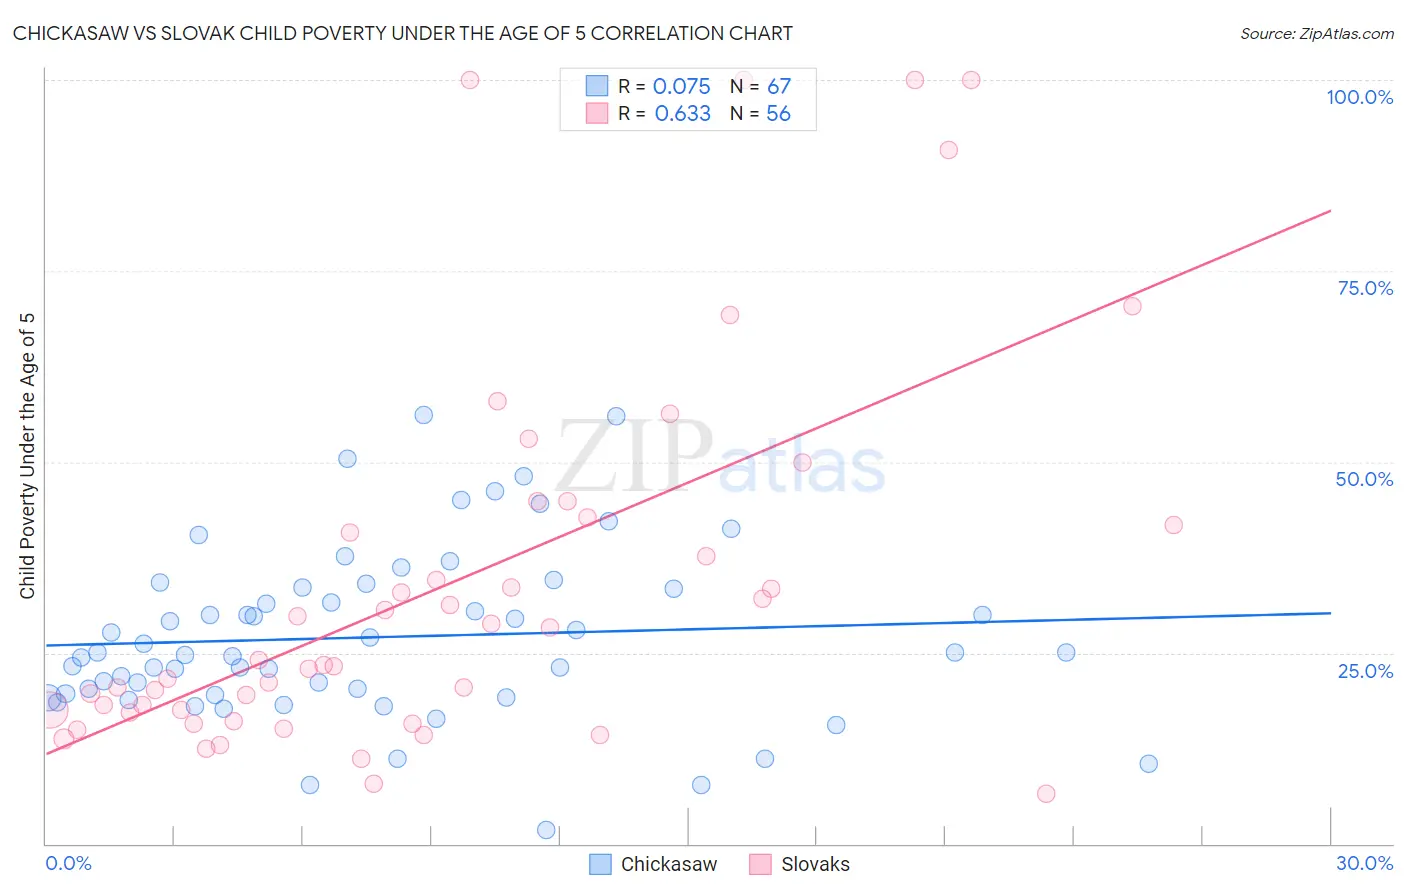 Chickasaw vs Slovak Child Poverty Under the Age of 5